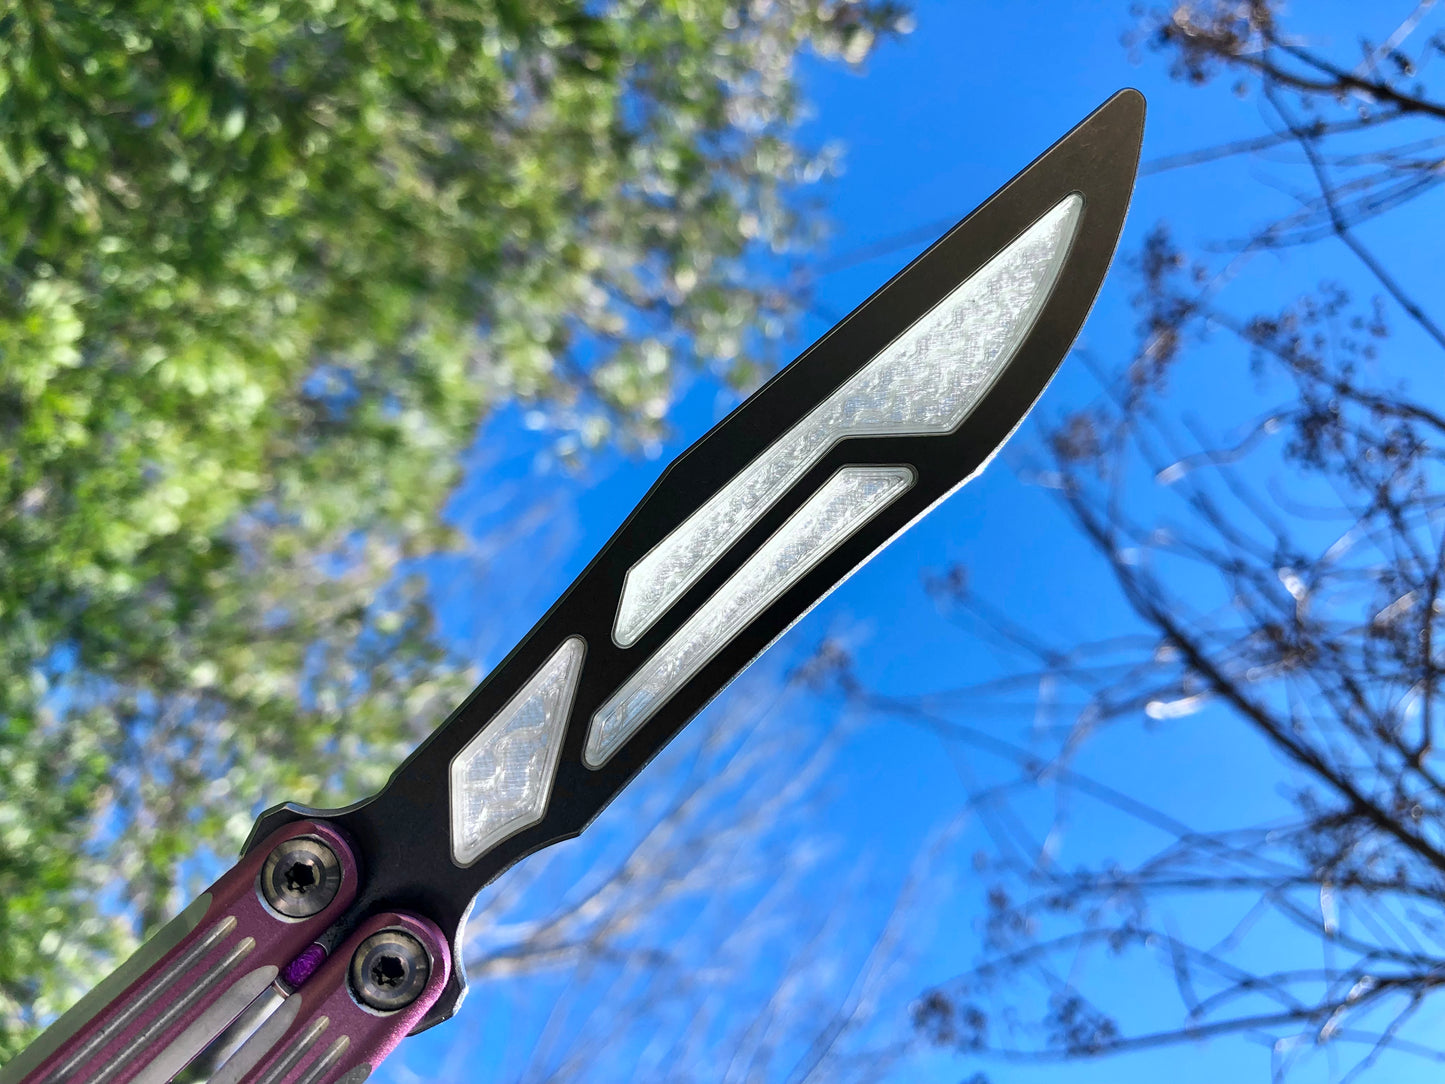 Adjust the weight distribution of your LDY Orion v1.5 balisong trainer with this custom-made Zippy balance mod. This mod consists of shatter-proof polyurethane inserts which add tip and spine weight to the blade for increased momentum and a more neutral balance.